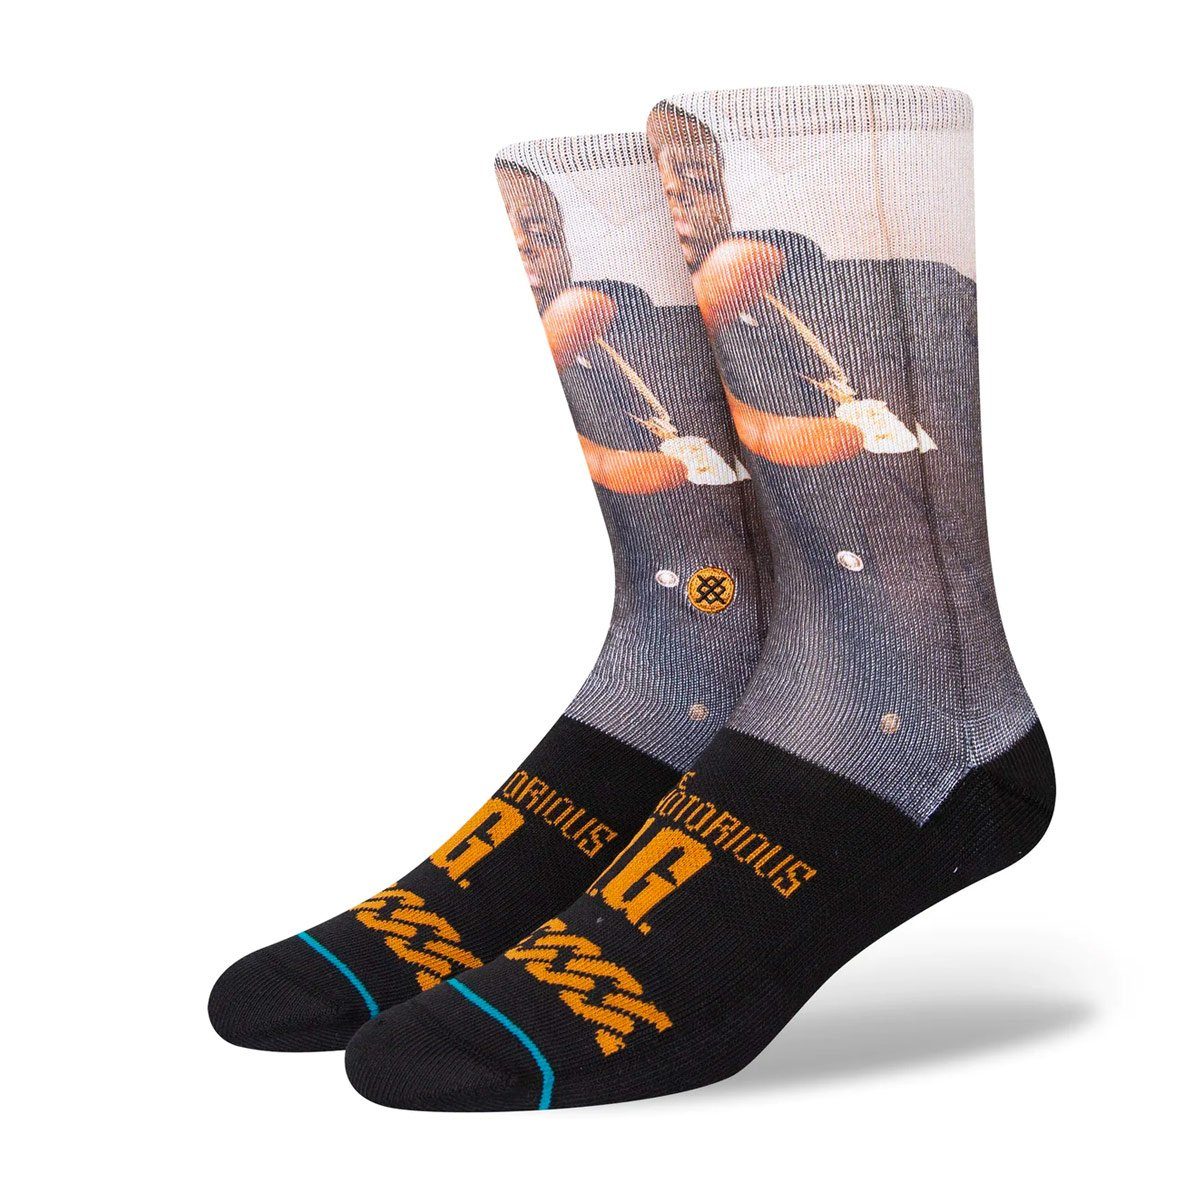 Stance Freizeitsocken The King Of NY - black (1 Paar) Stance x The Notorious B.I.G.